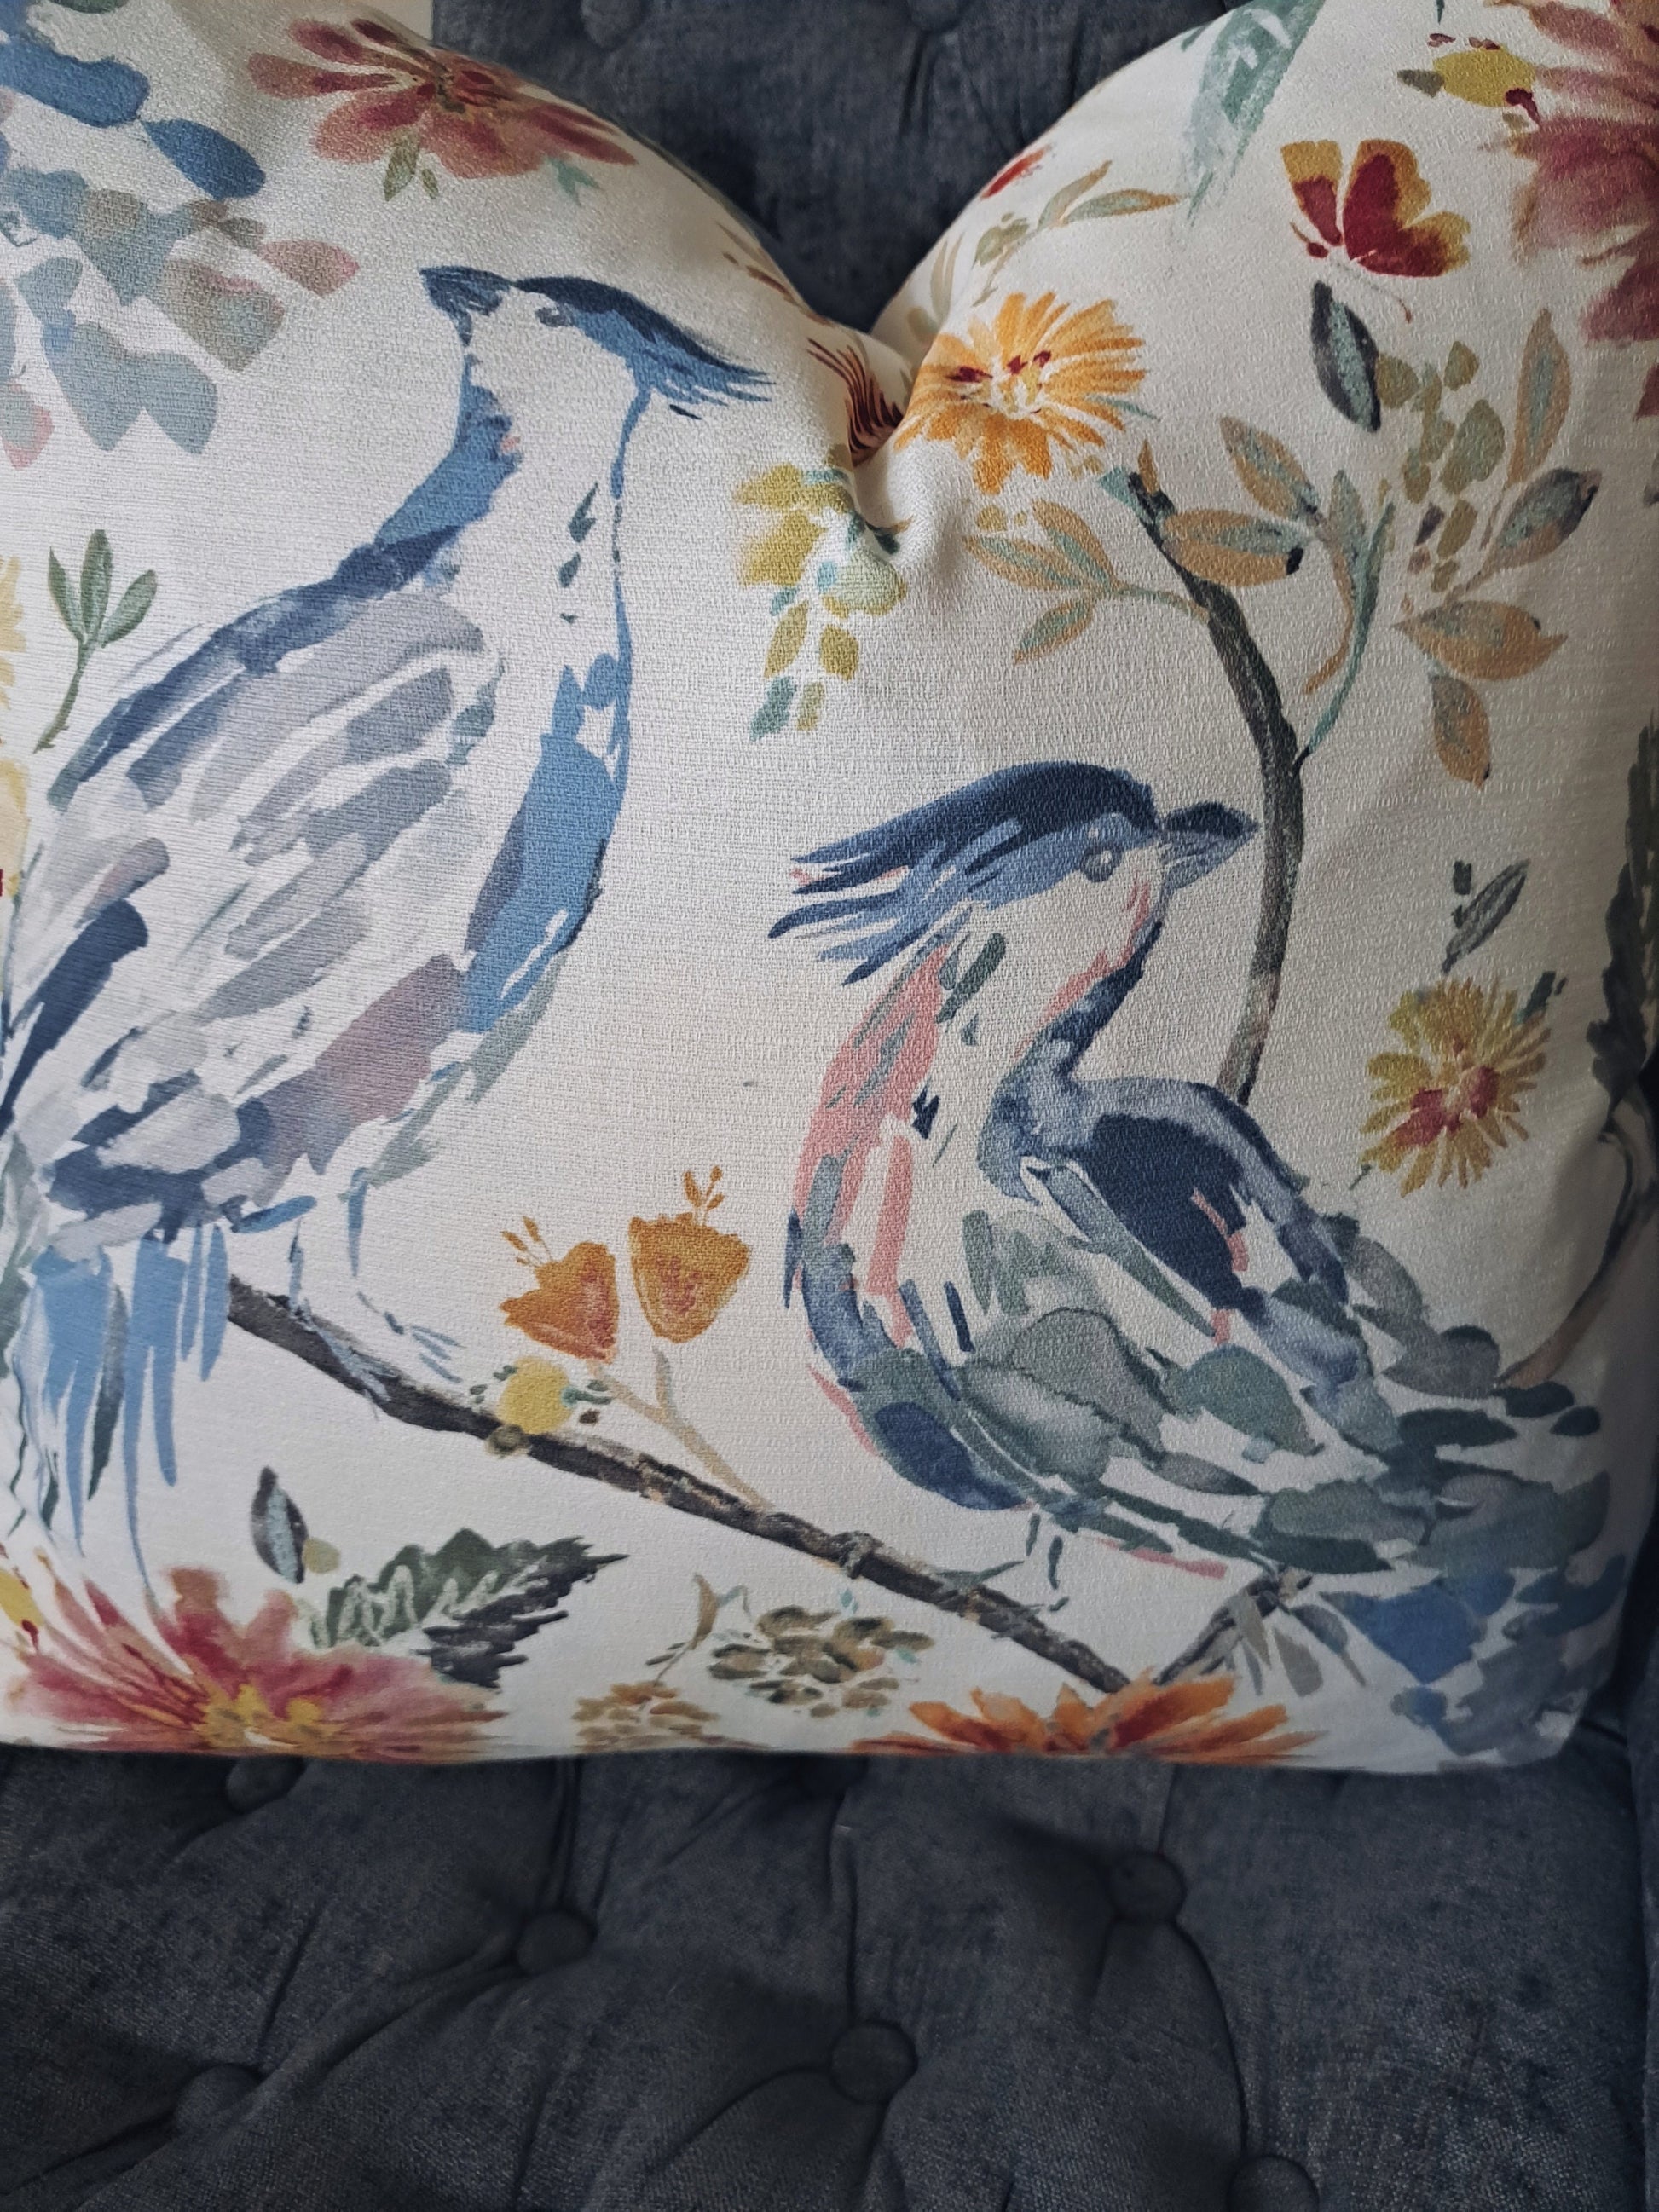 Blue Bird and Colorful Floral Pillow Cover